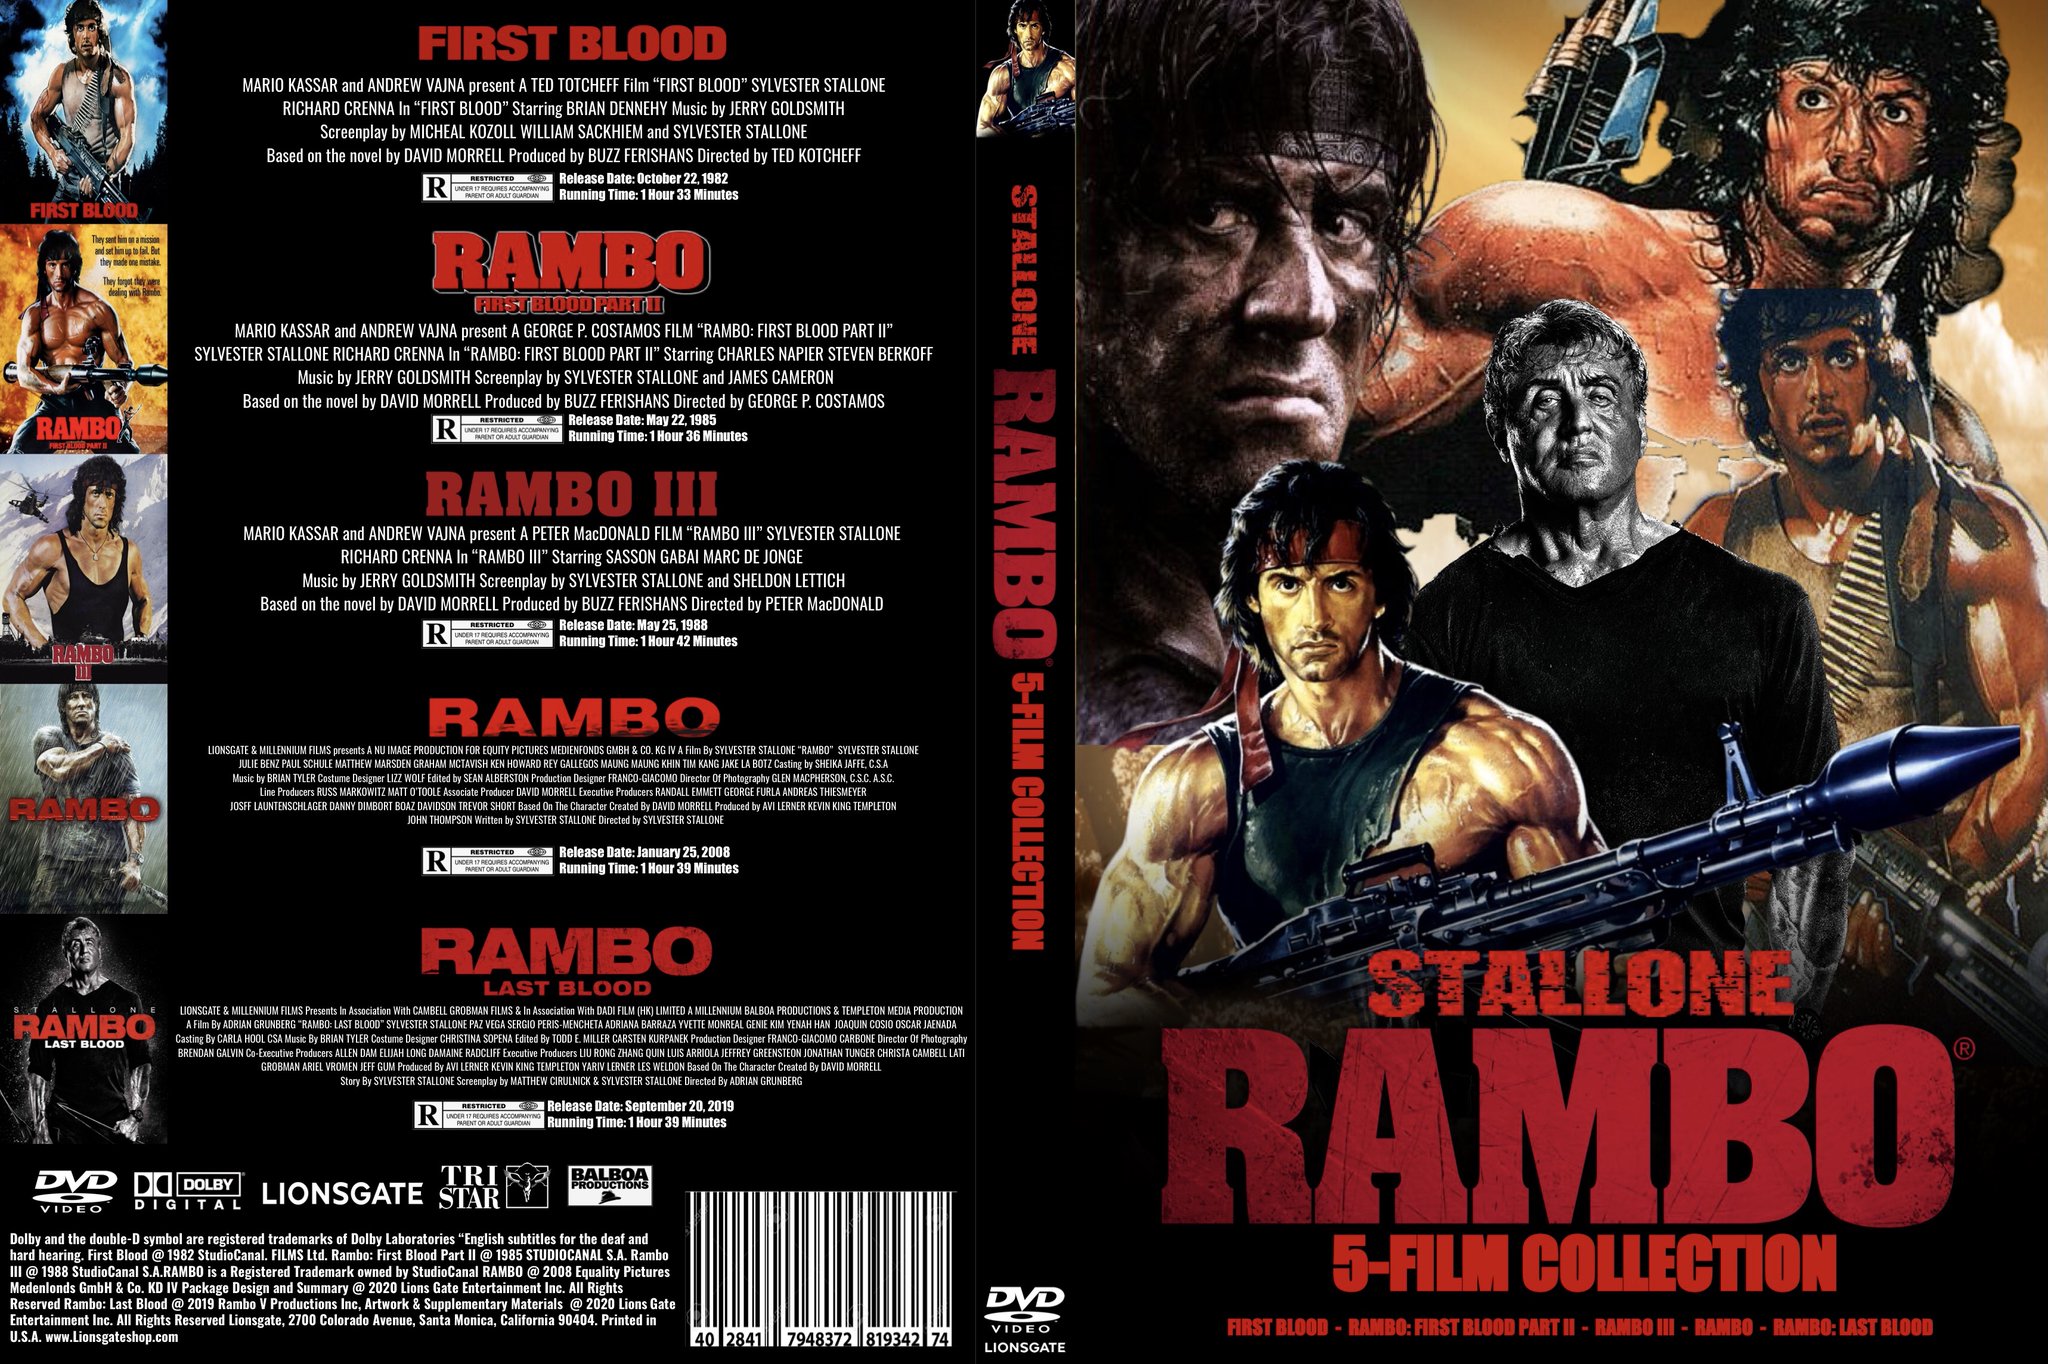 Miguel Arcos - CEO Of James Bond #TOHThanksToThem on X: "Here's a fun  custom DVD cover I made for the Rambo 5-Film Collection to show how much I  love the franchise you